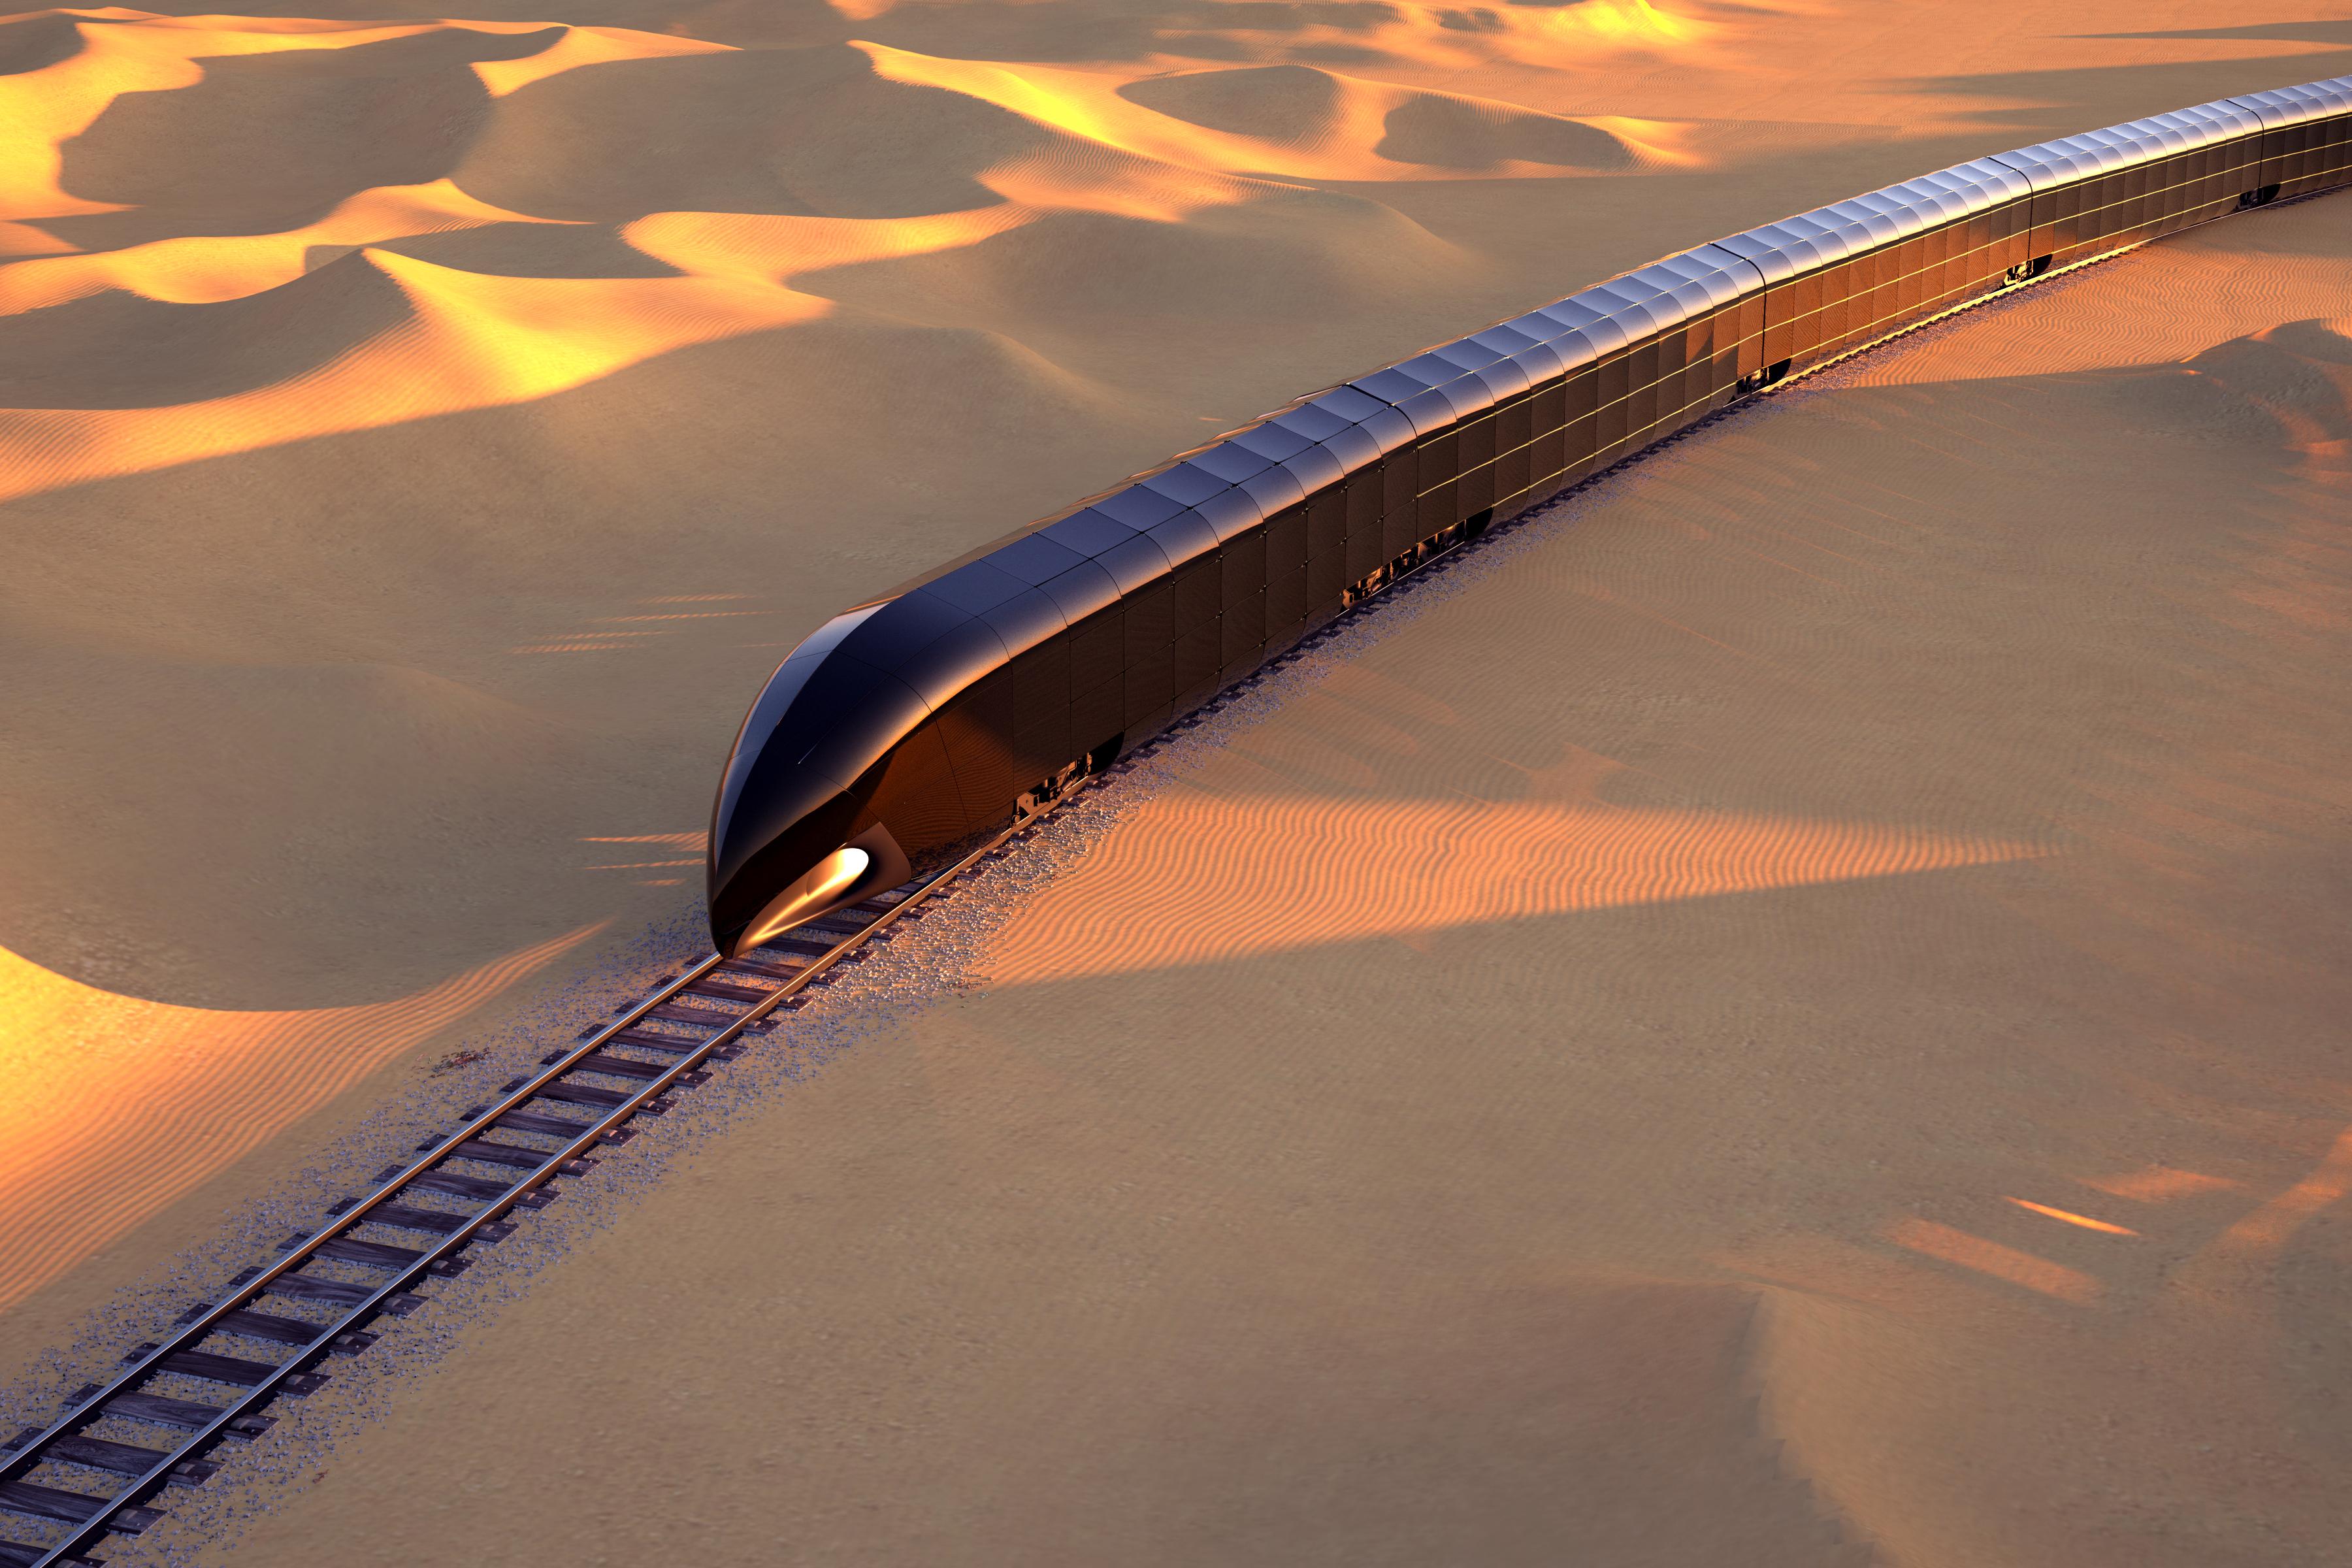 The "G-Train" Is a $350 Million Luxury Train of the Future